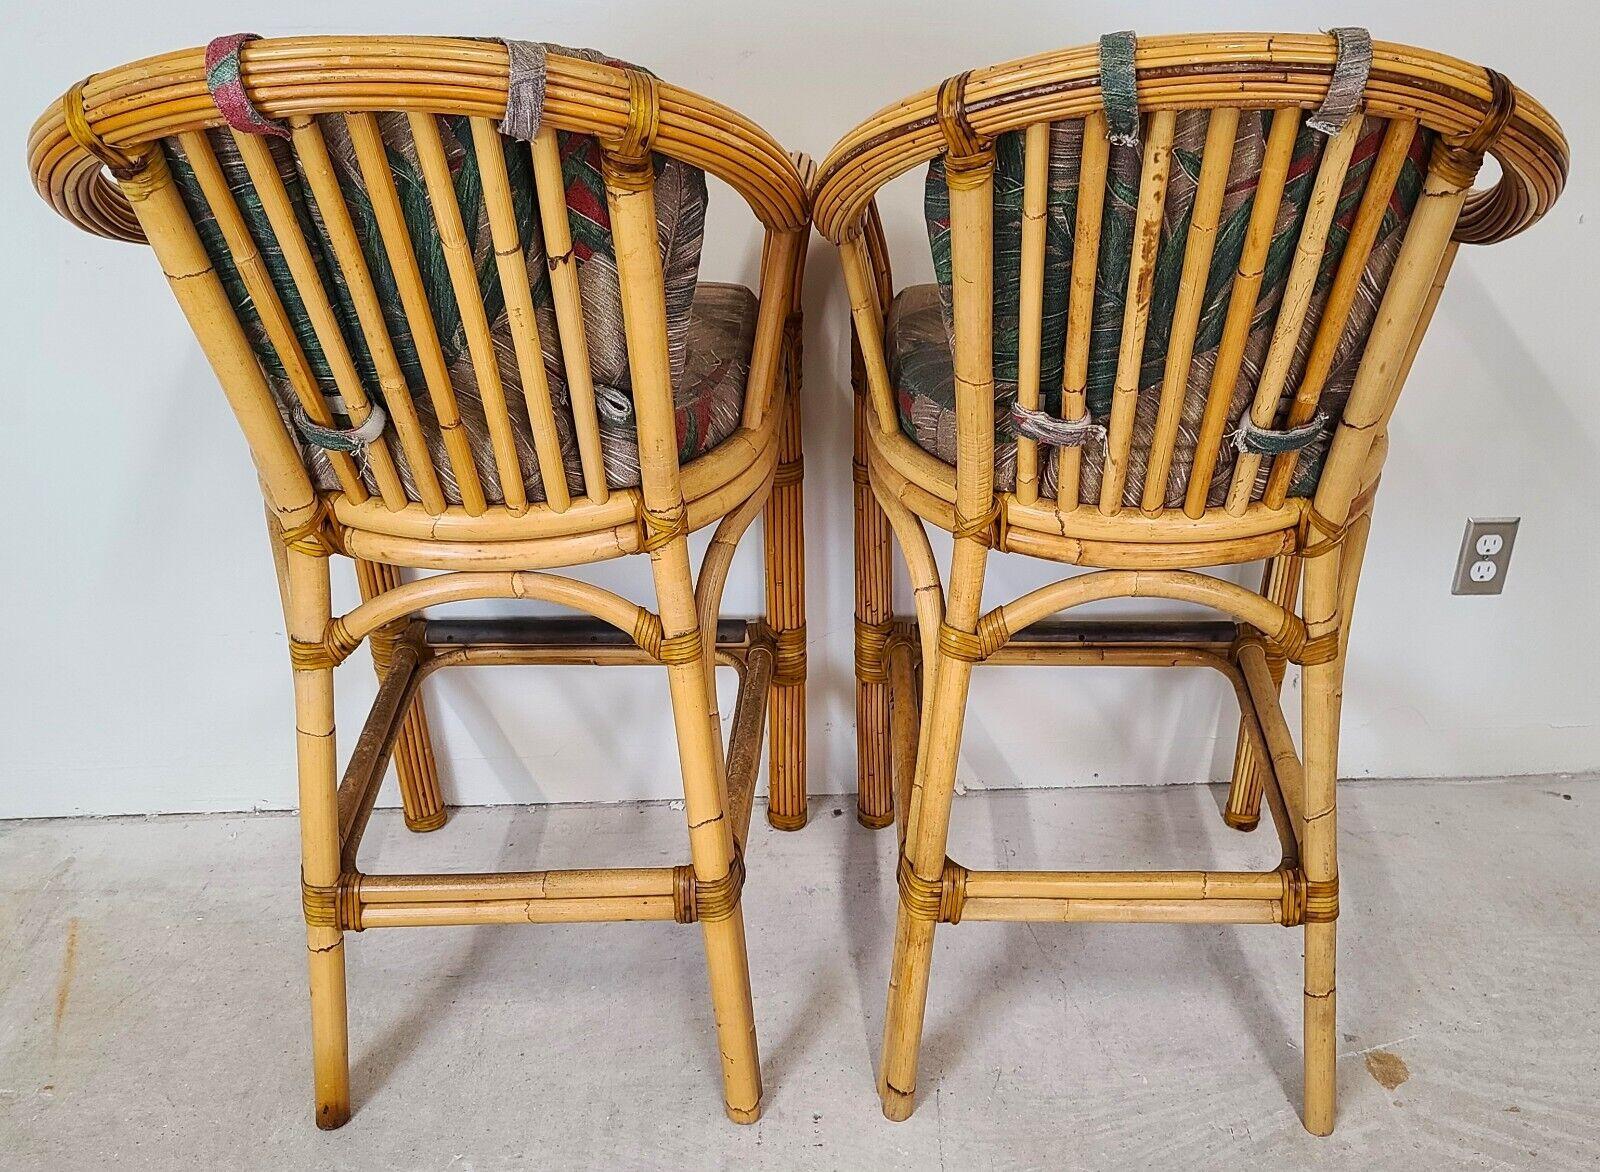 Leather Vintage Palm Beach Bamboo & Rattan Barstools - Set of 4